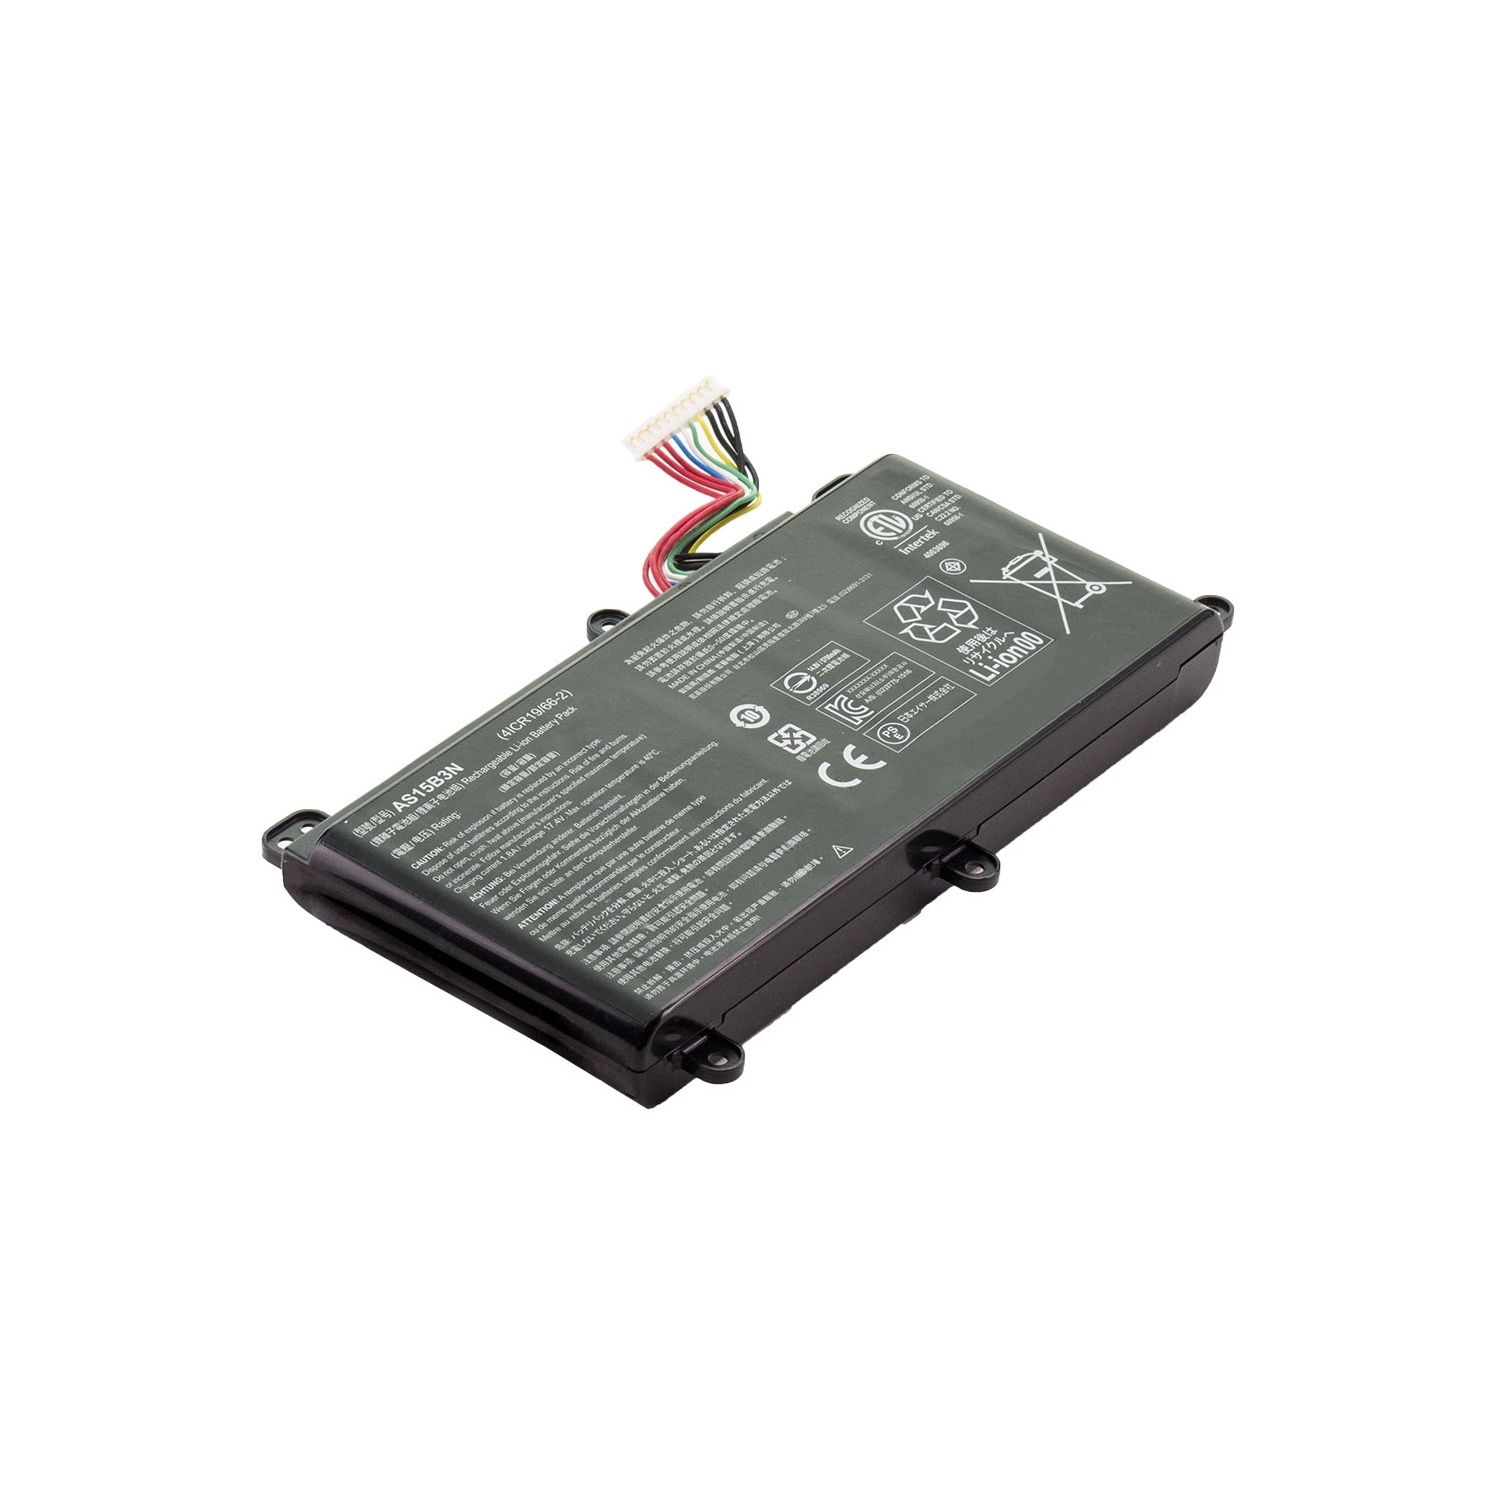 Laptop Battery Replacement for Acer Predator 15 G9-592, AS15B3N, KT.00803.004, KT.00803.005